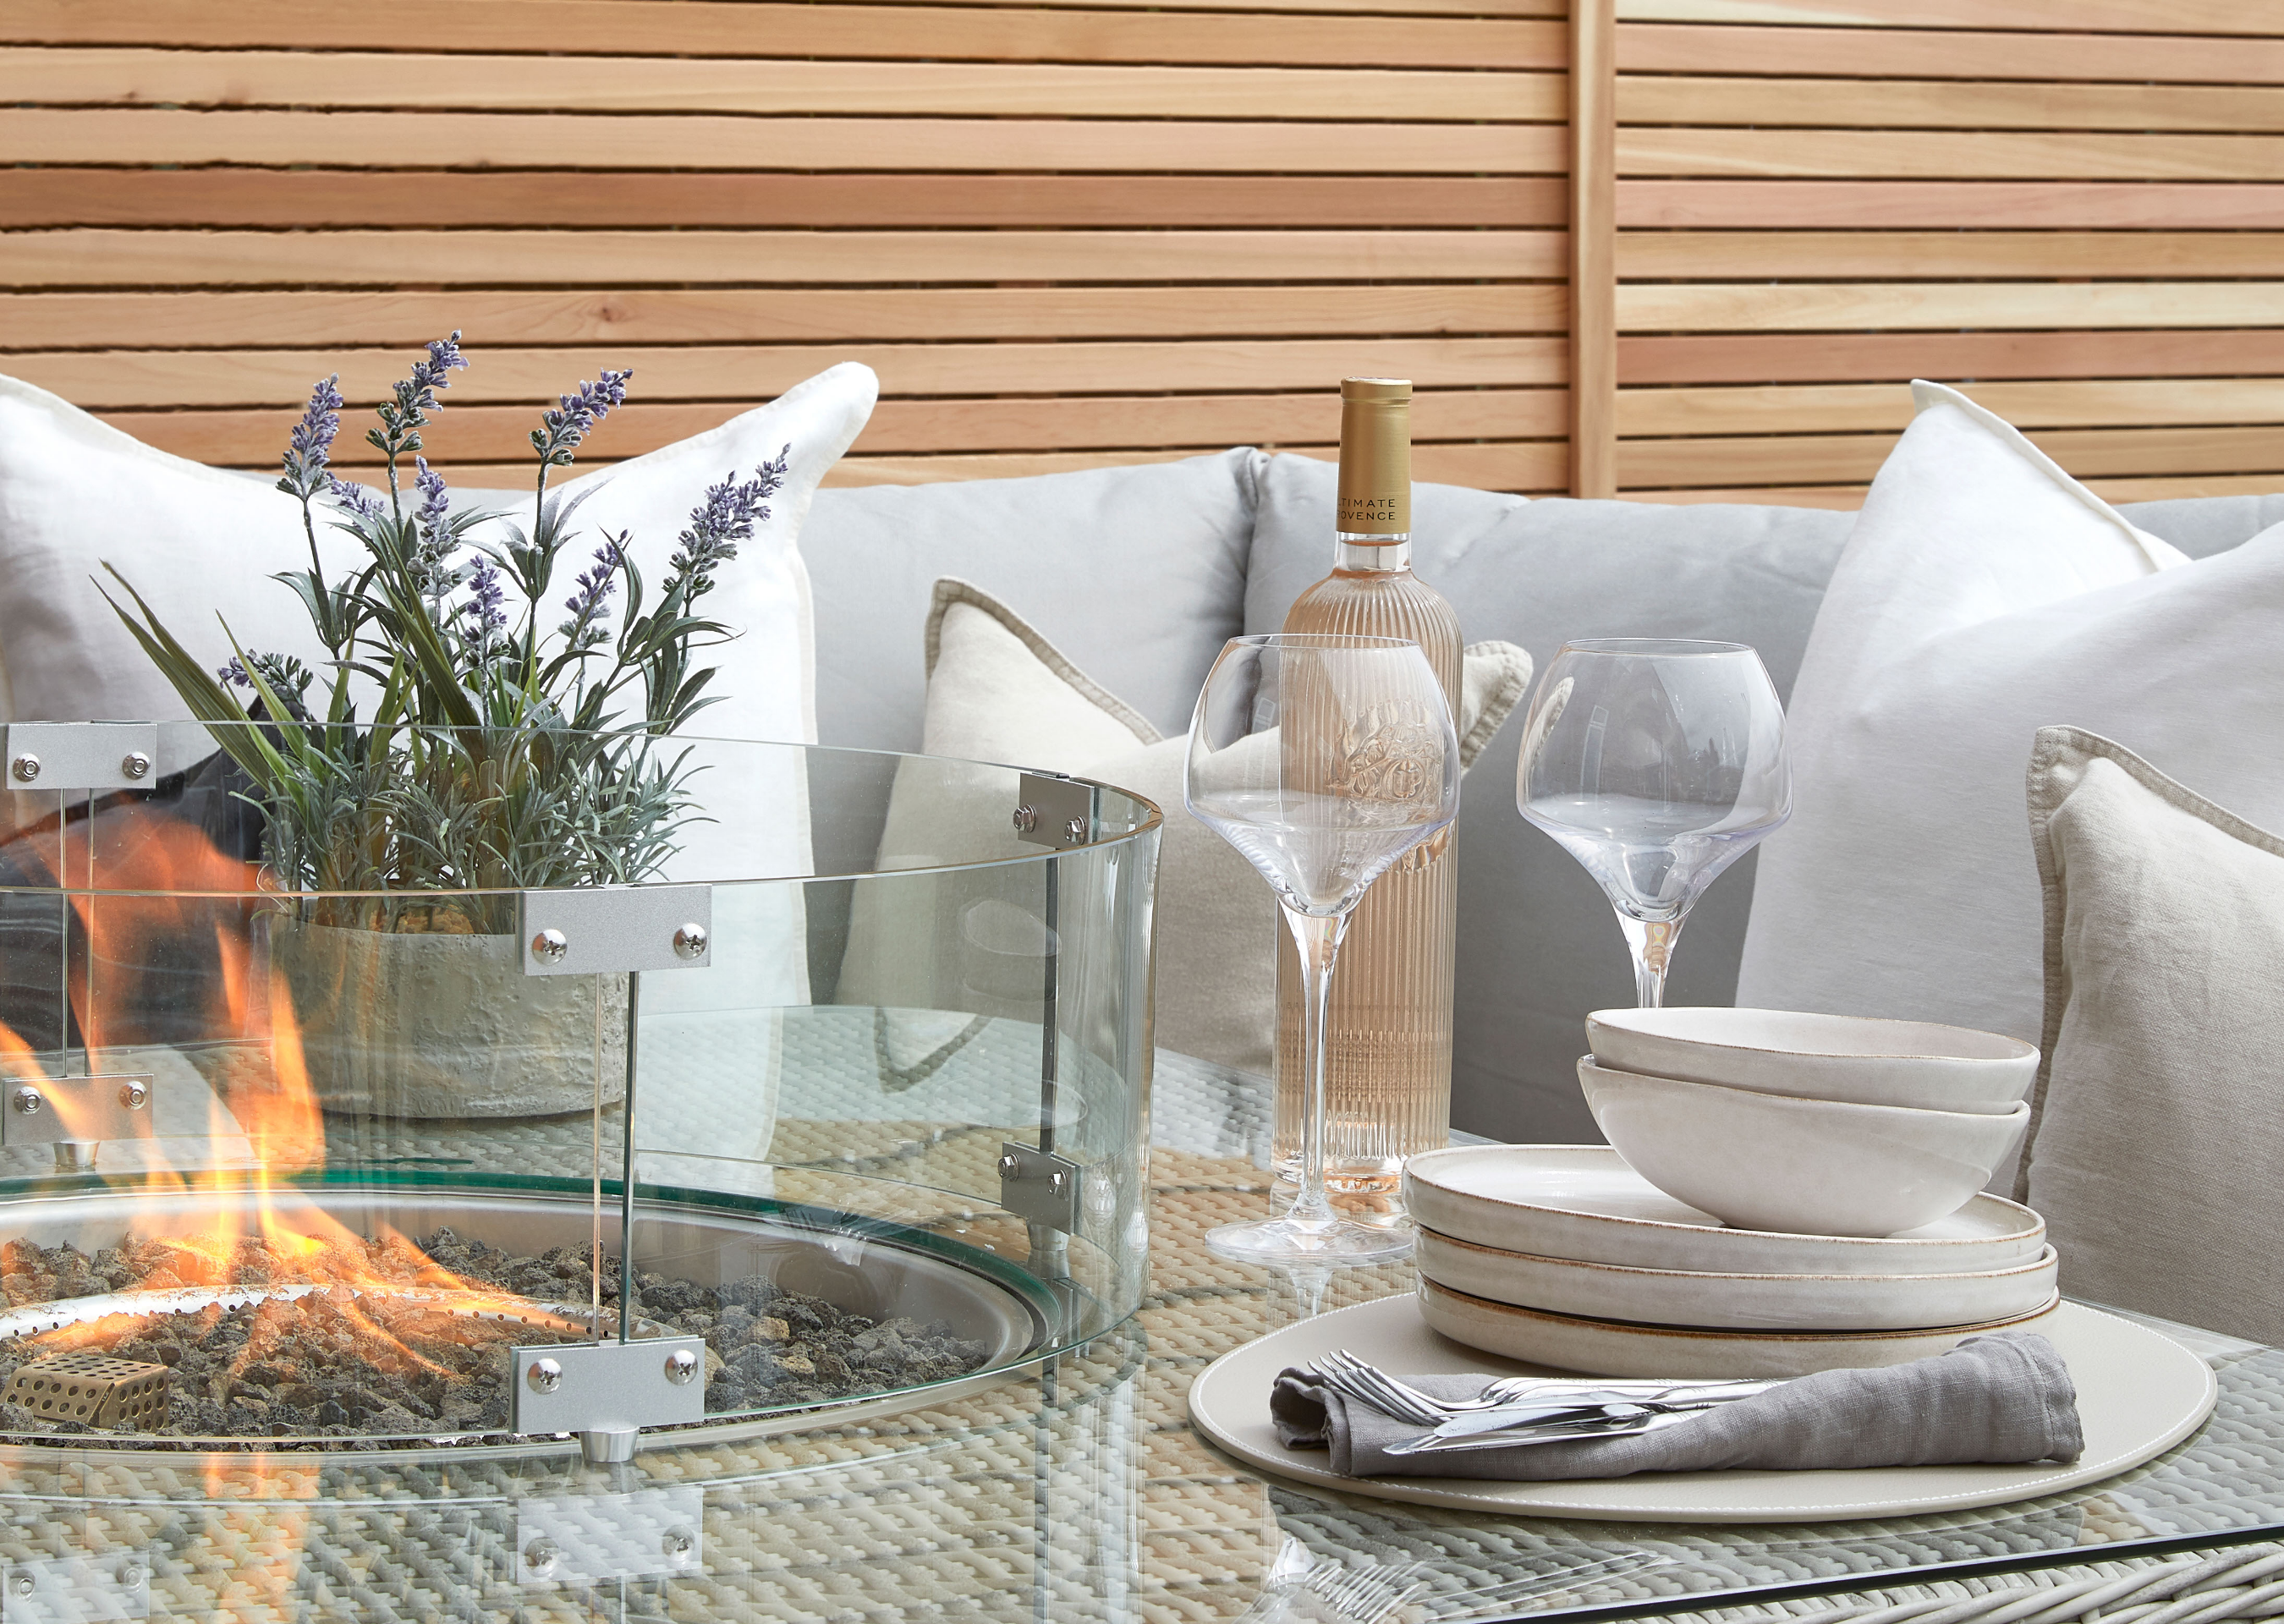 Outdoor seating area with small firepit, glasses and wine bottle. 